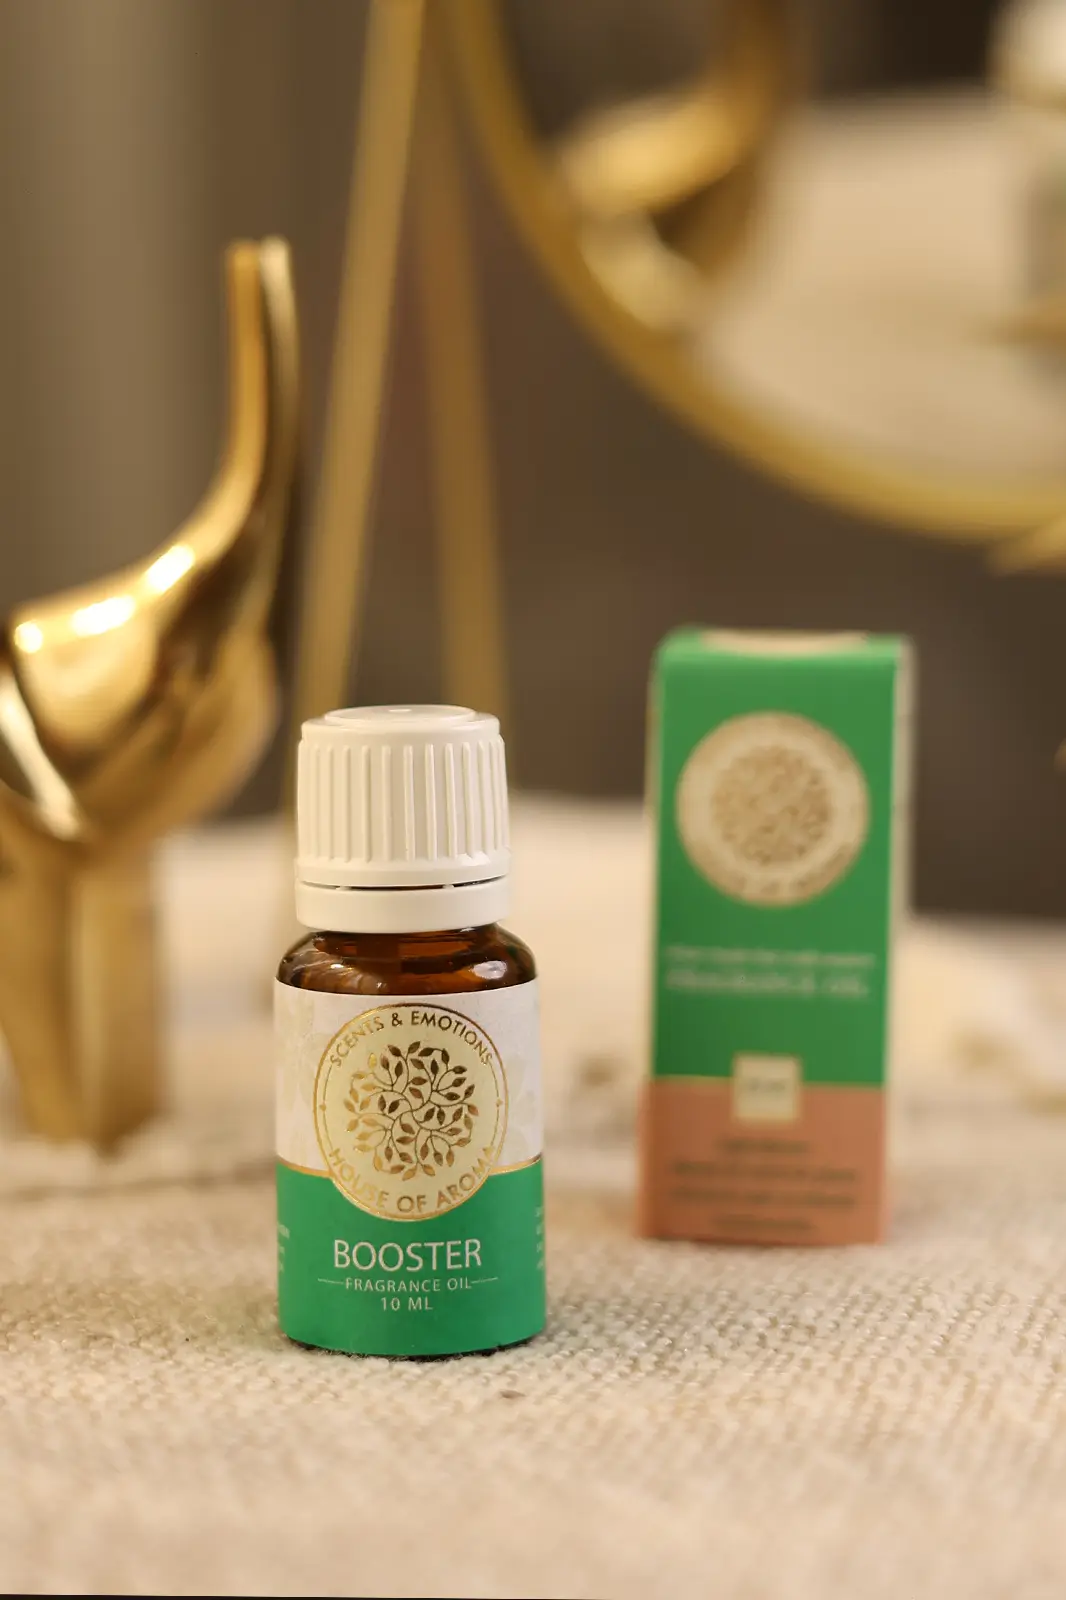 Booster fragrance oil, Booster oil, Fragrance oil, Booster oil for skin, Scented fragrance oil, Fragrance oil in diffuser, fragrance oil diffuser, hair booster oil benefits, dandruff control booster oil shots, fragrance oil diffuser, candle oil, house of aroma